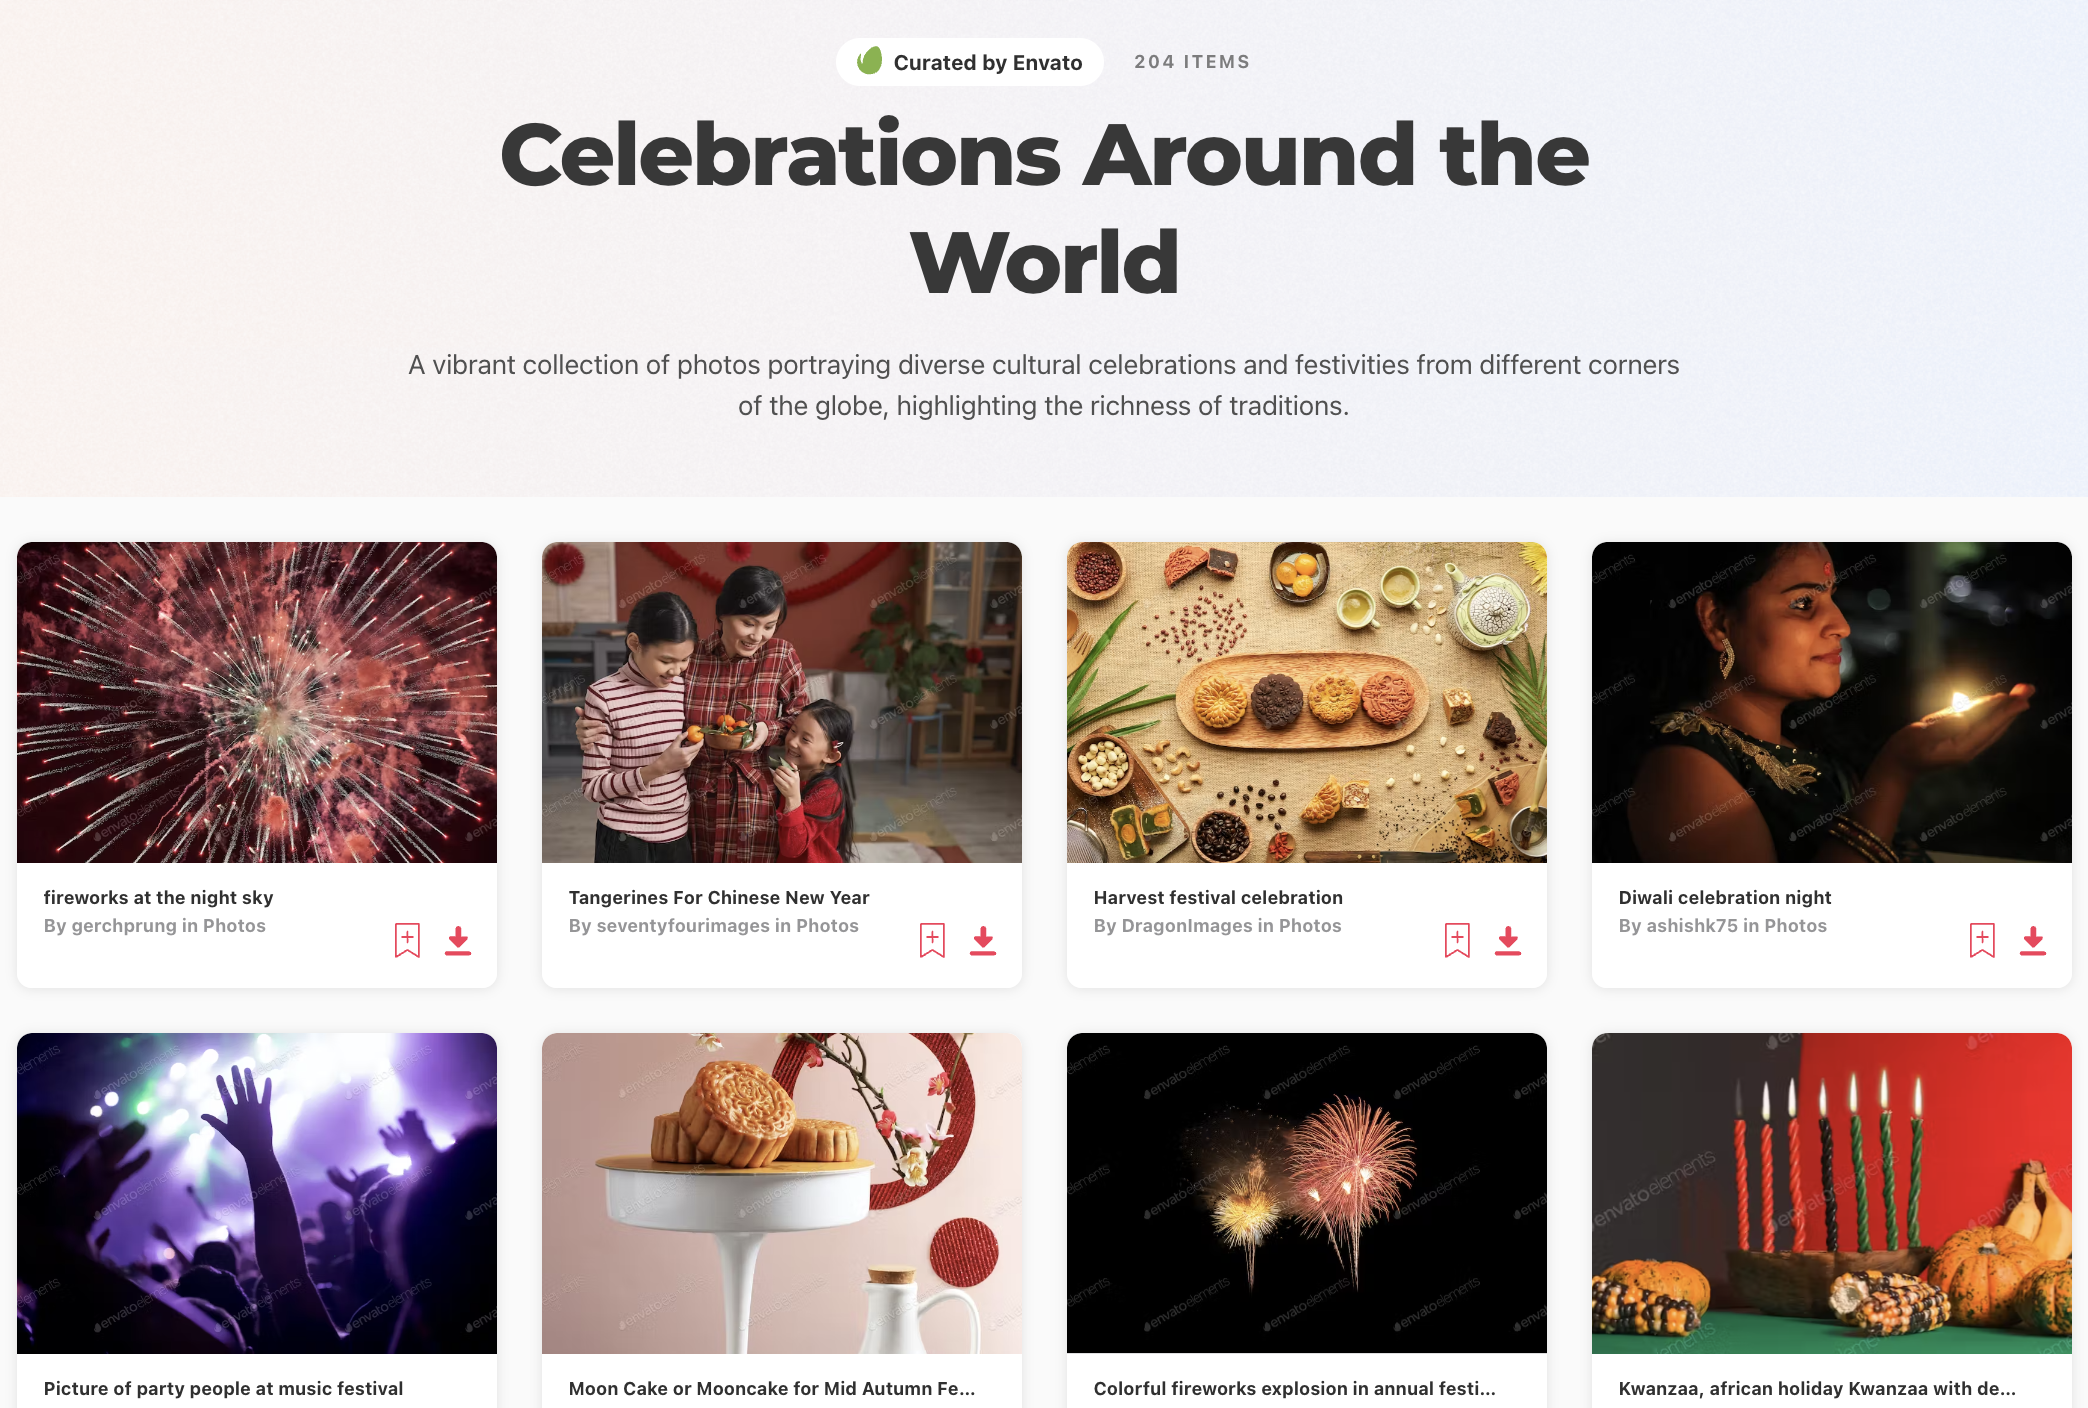 Screenshot of curated collection "Celebrations Around the World", a vibrant collection of photos portraying diverse cultural celebrations and festivities from different corners of the globe, highlighting the richness of traditions.